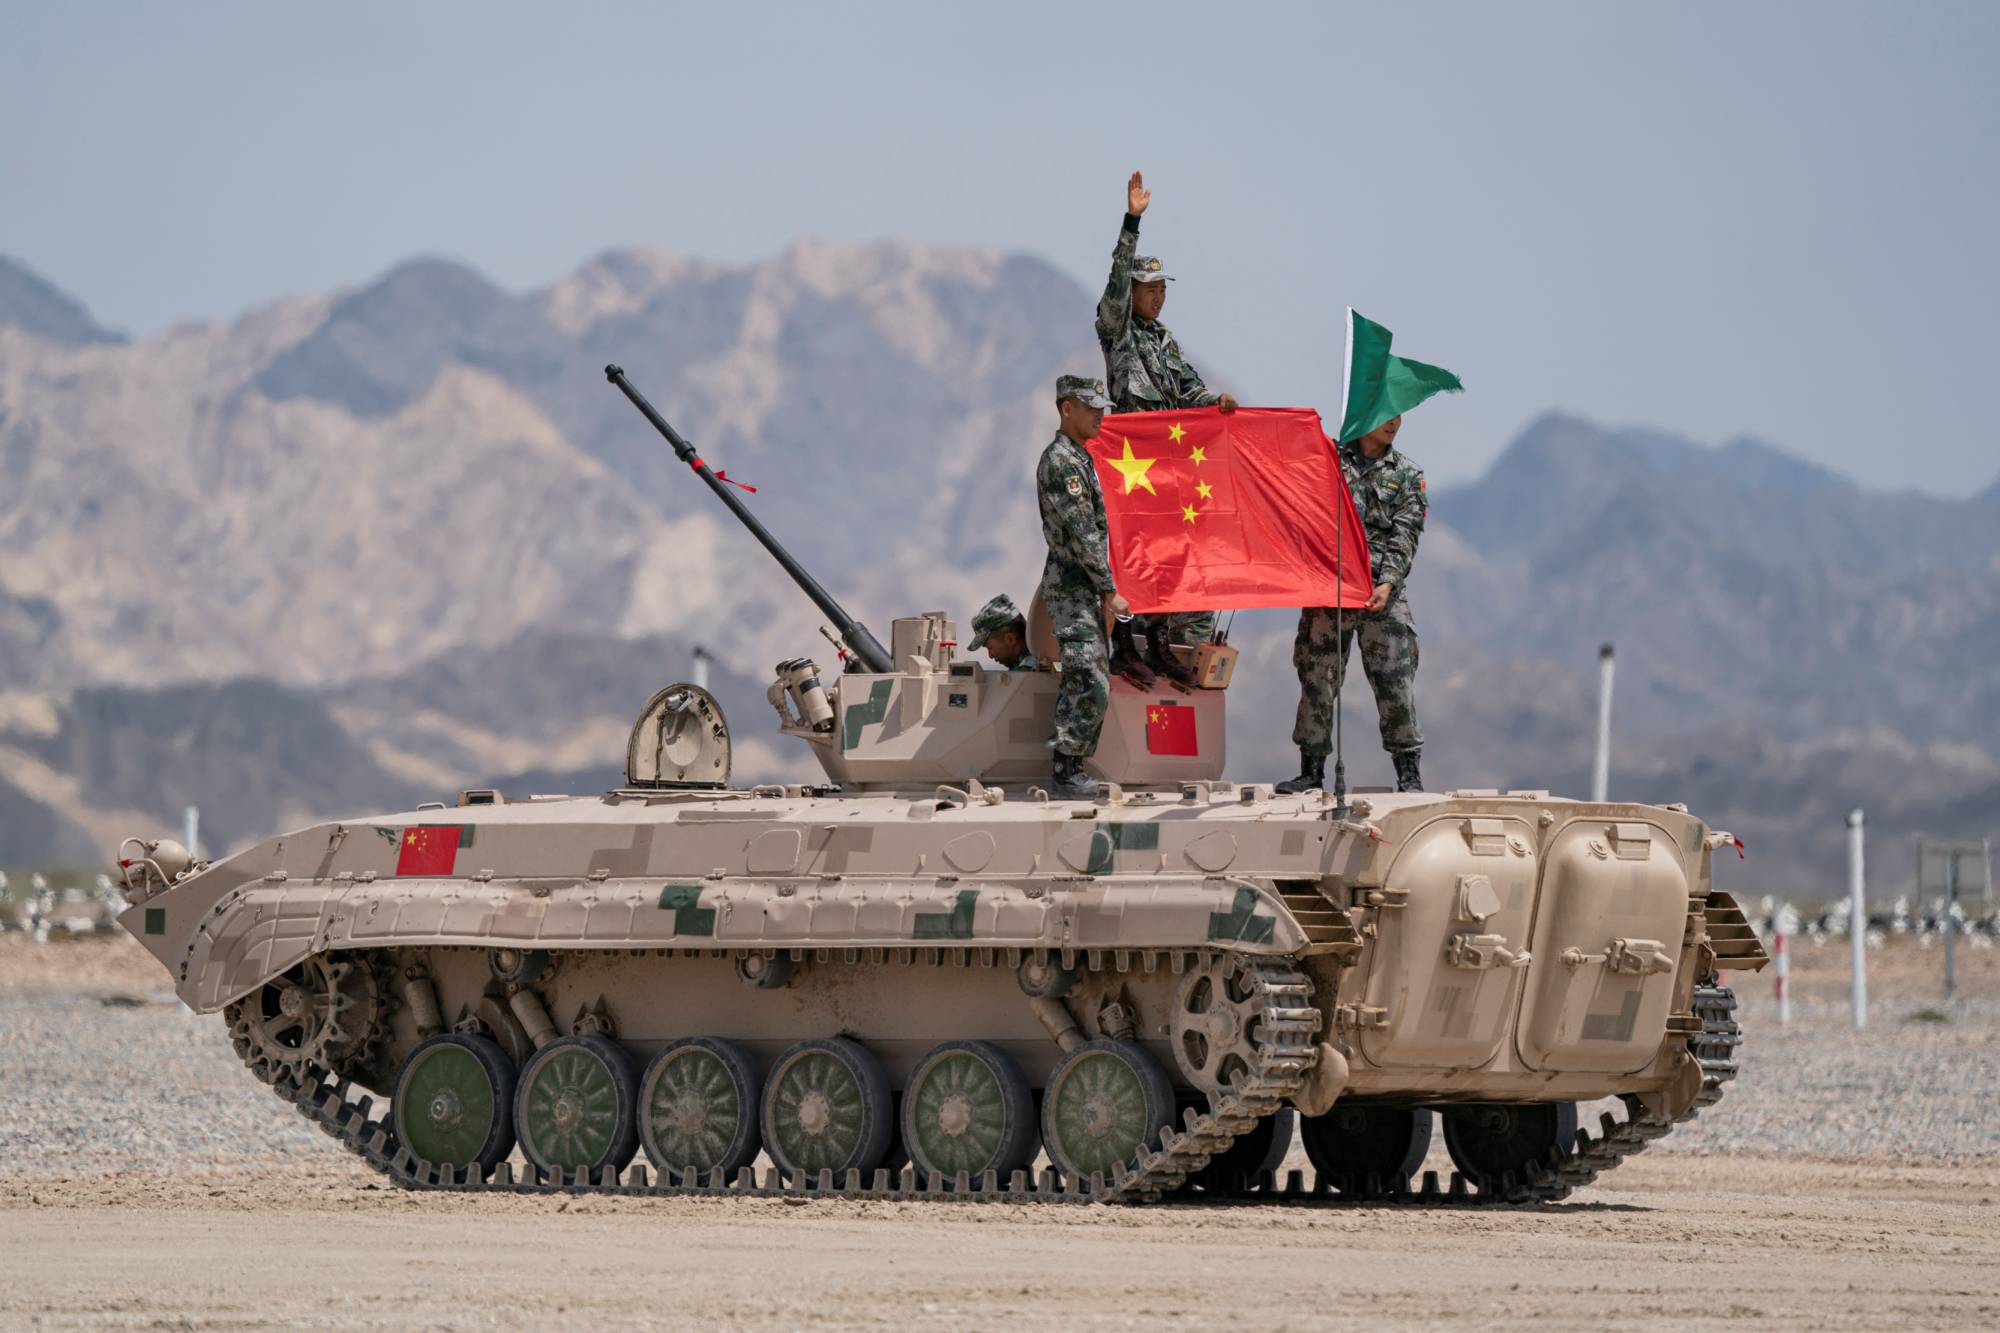 China intensifies military drills with Russia amid U.S. sanctions - The ...